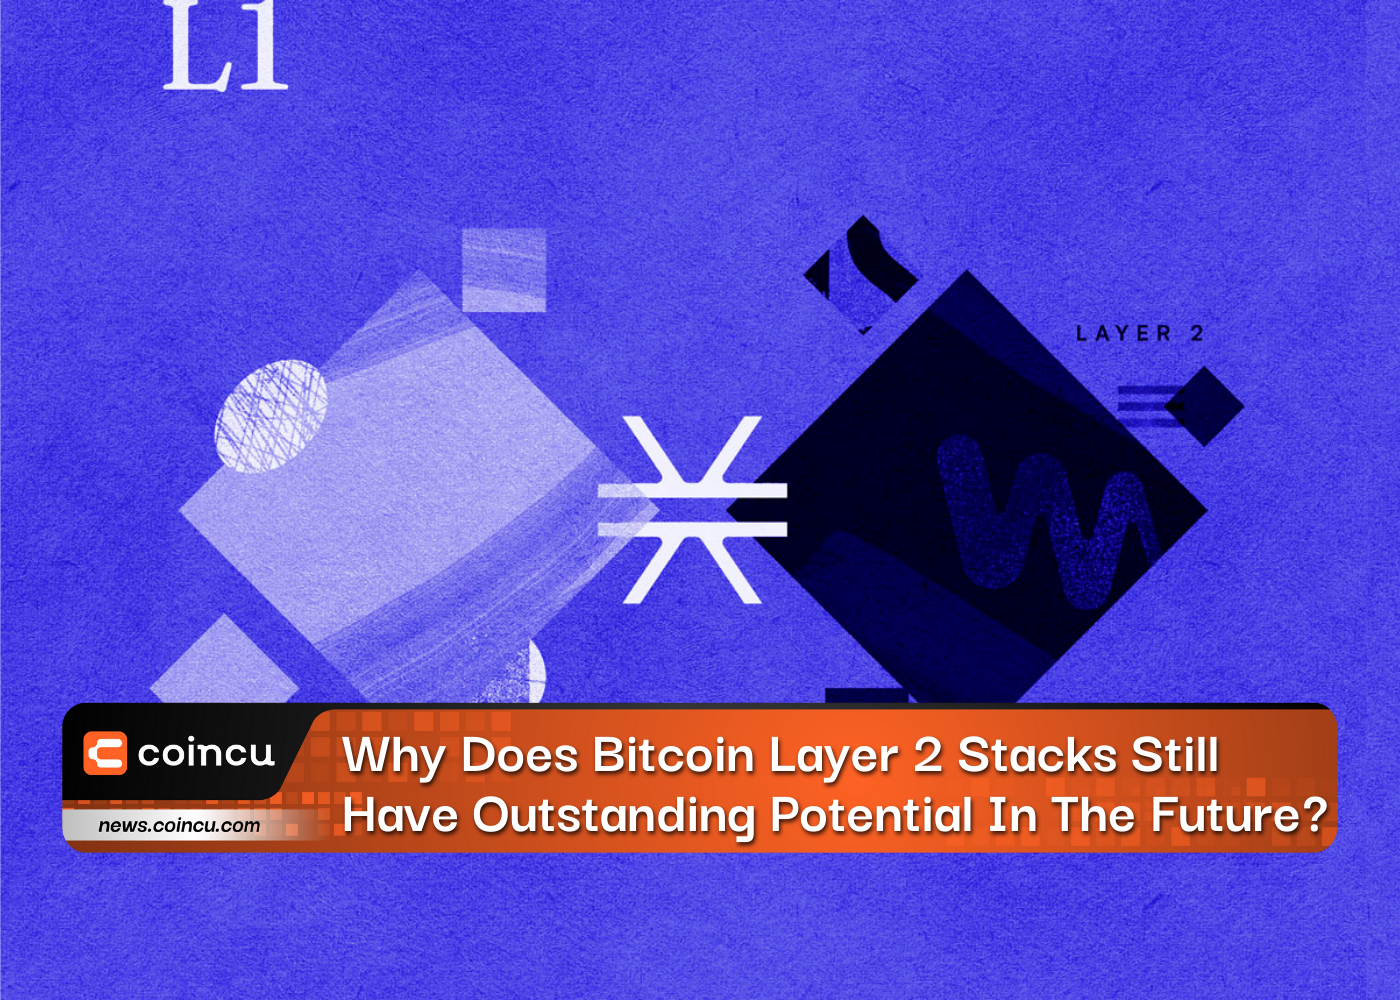 Why Does Bitcoin Layer 2 Stacks Still Have Outstanding Potential In The Future?